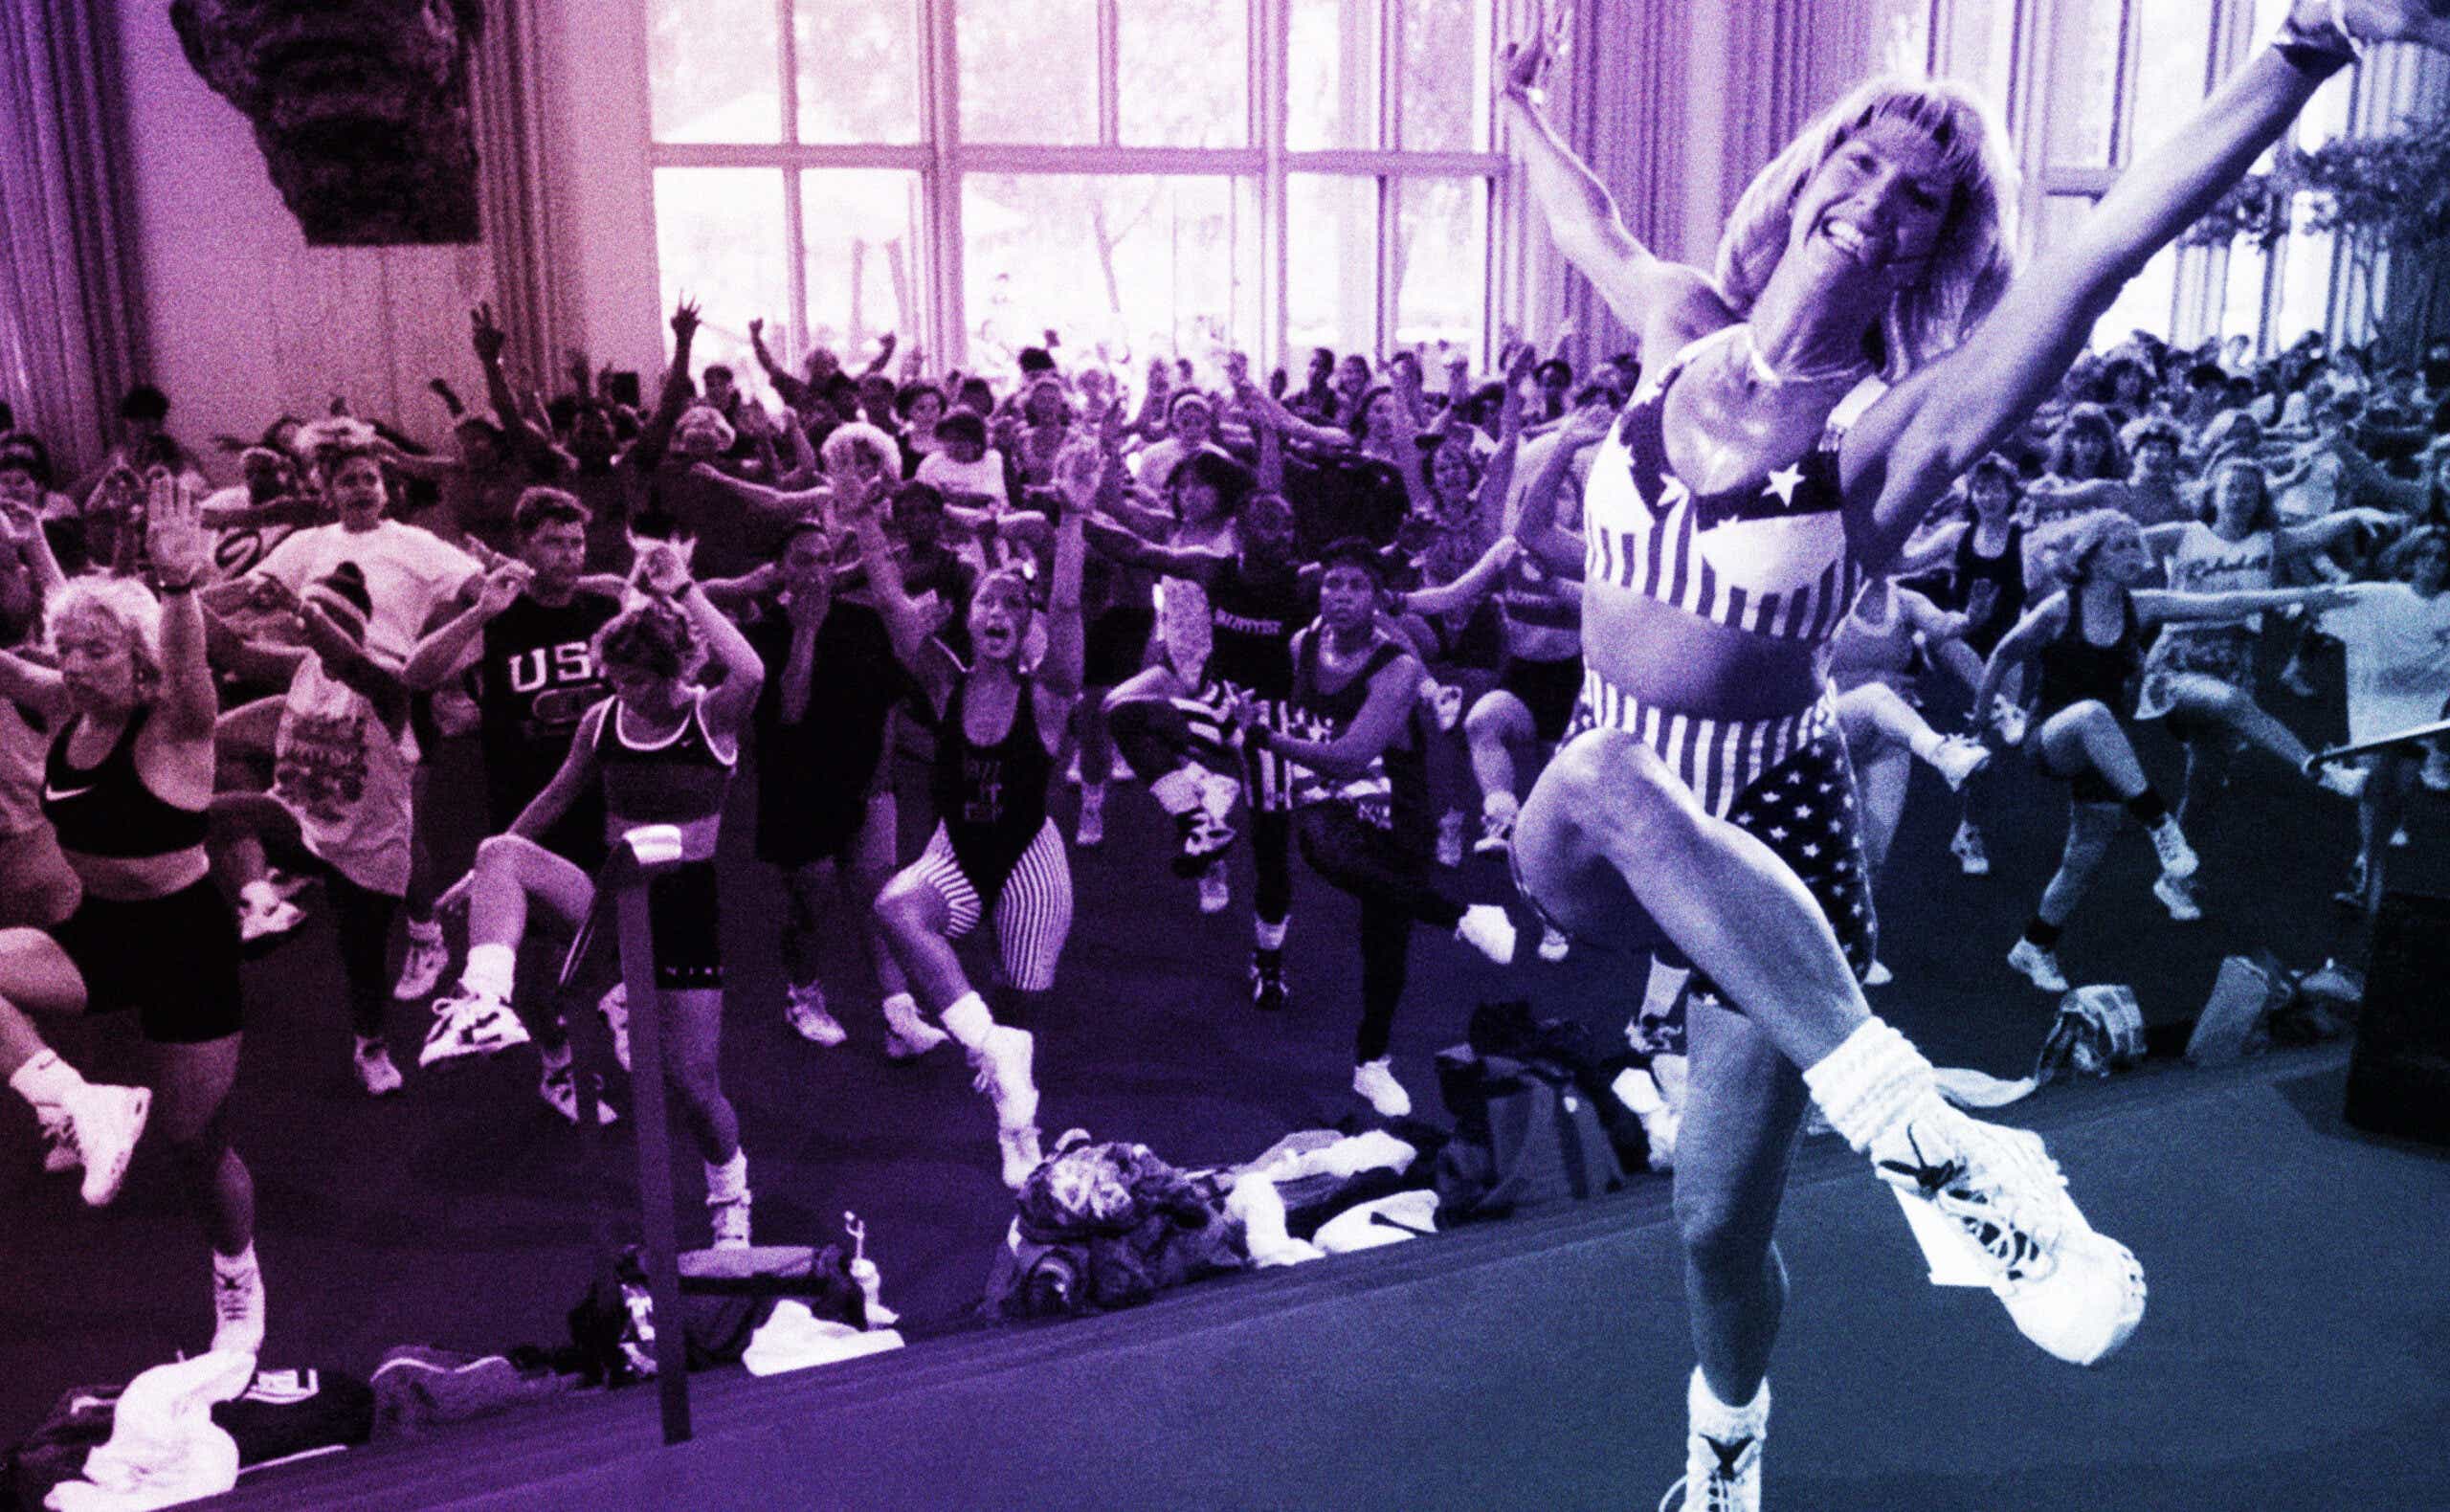 Founder of Jazzercise workout reveals what led her to start